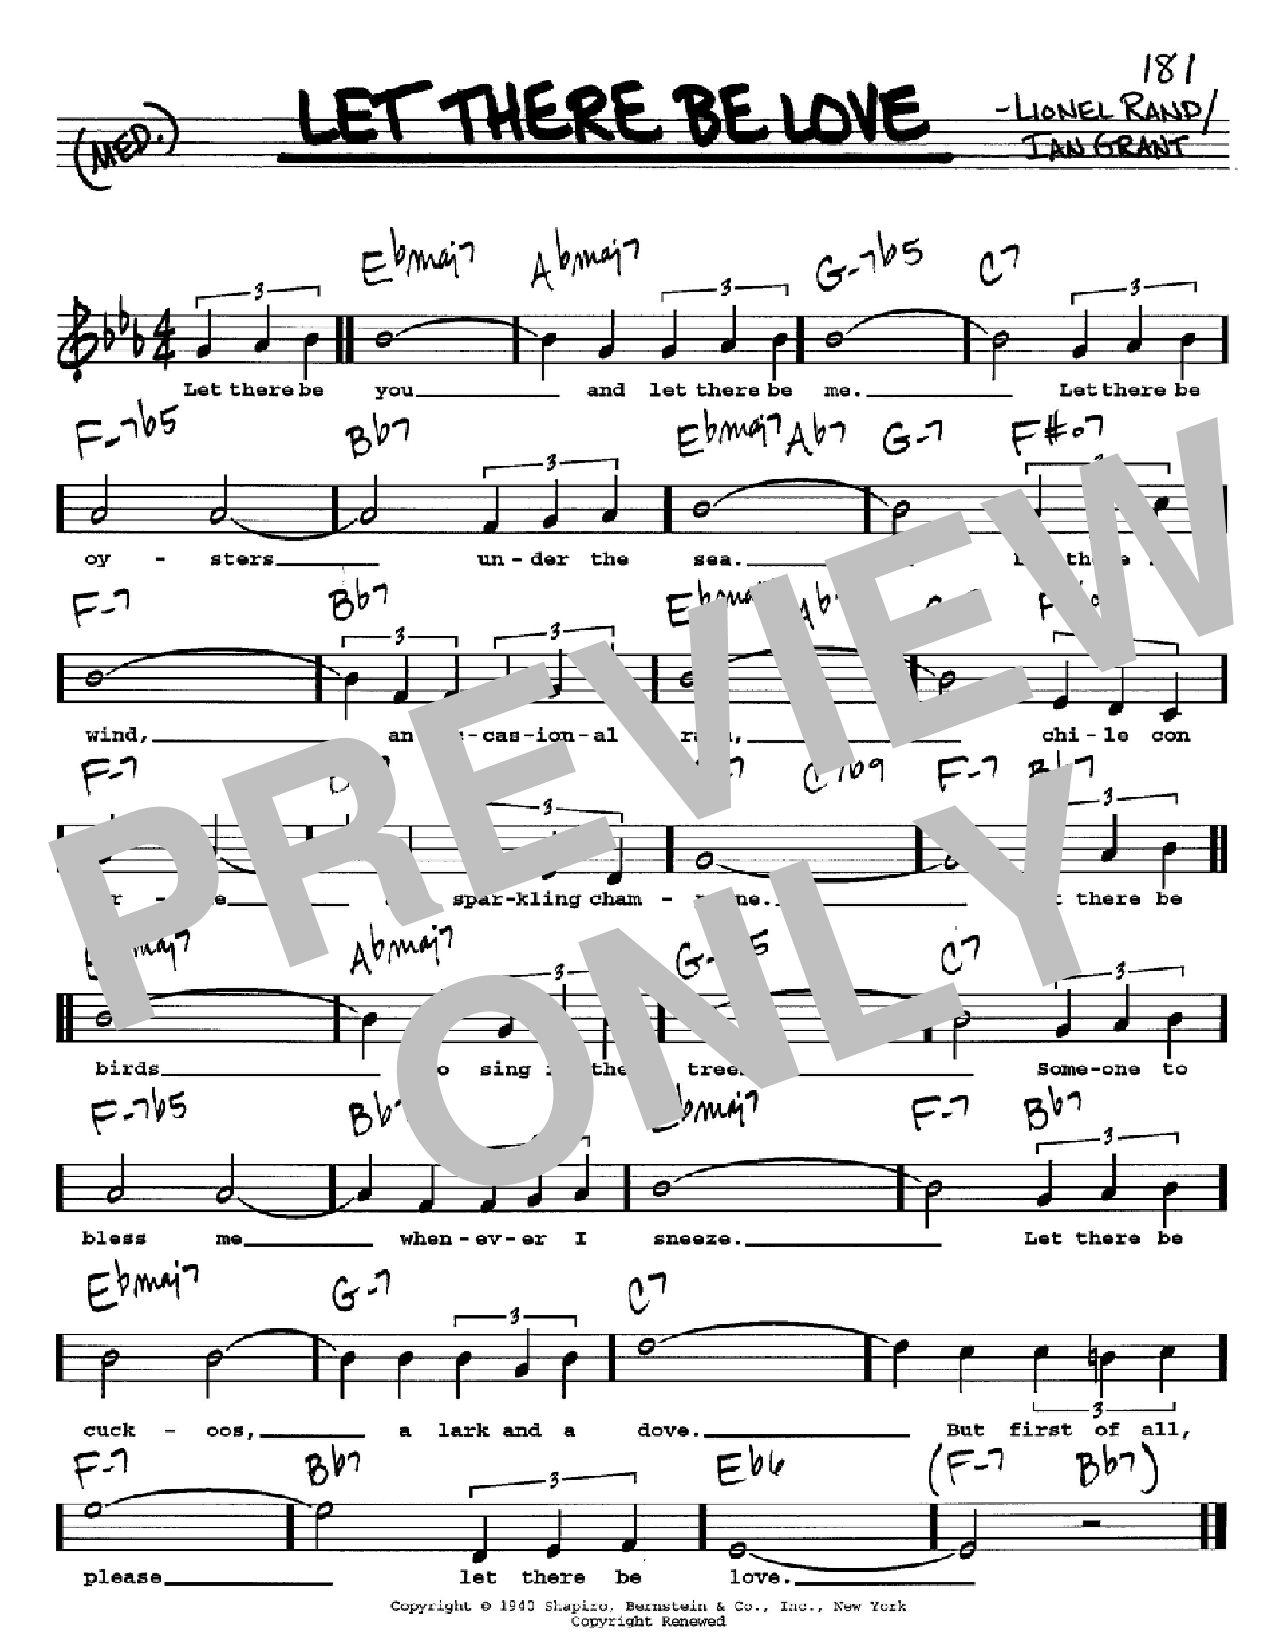 Download Ian Grant Let There Be Love Sheet Music